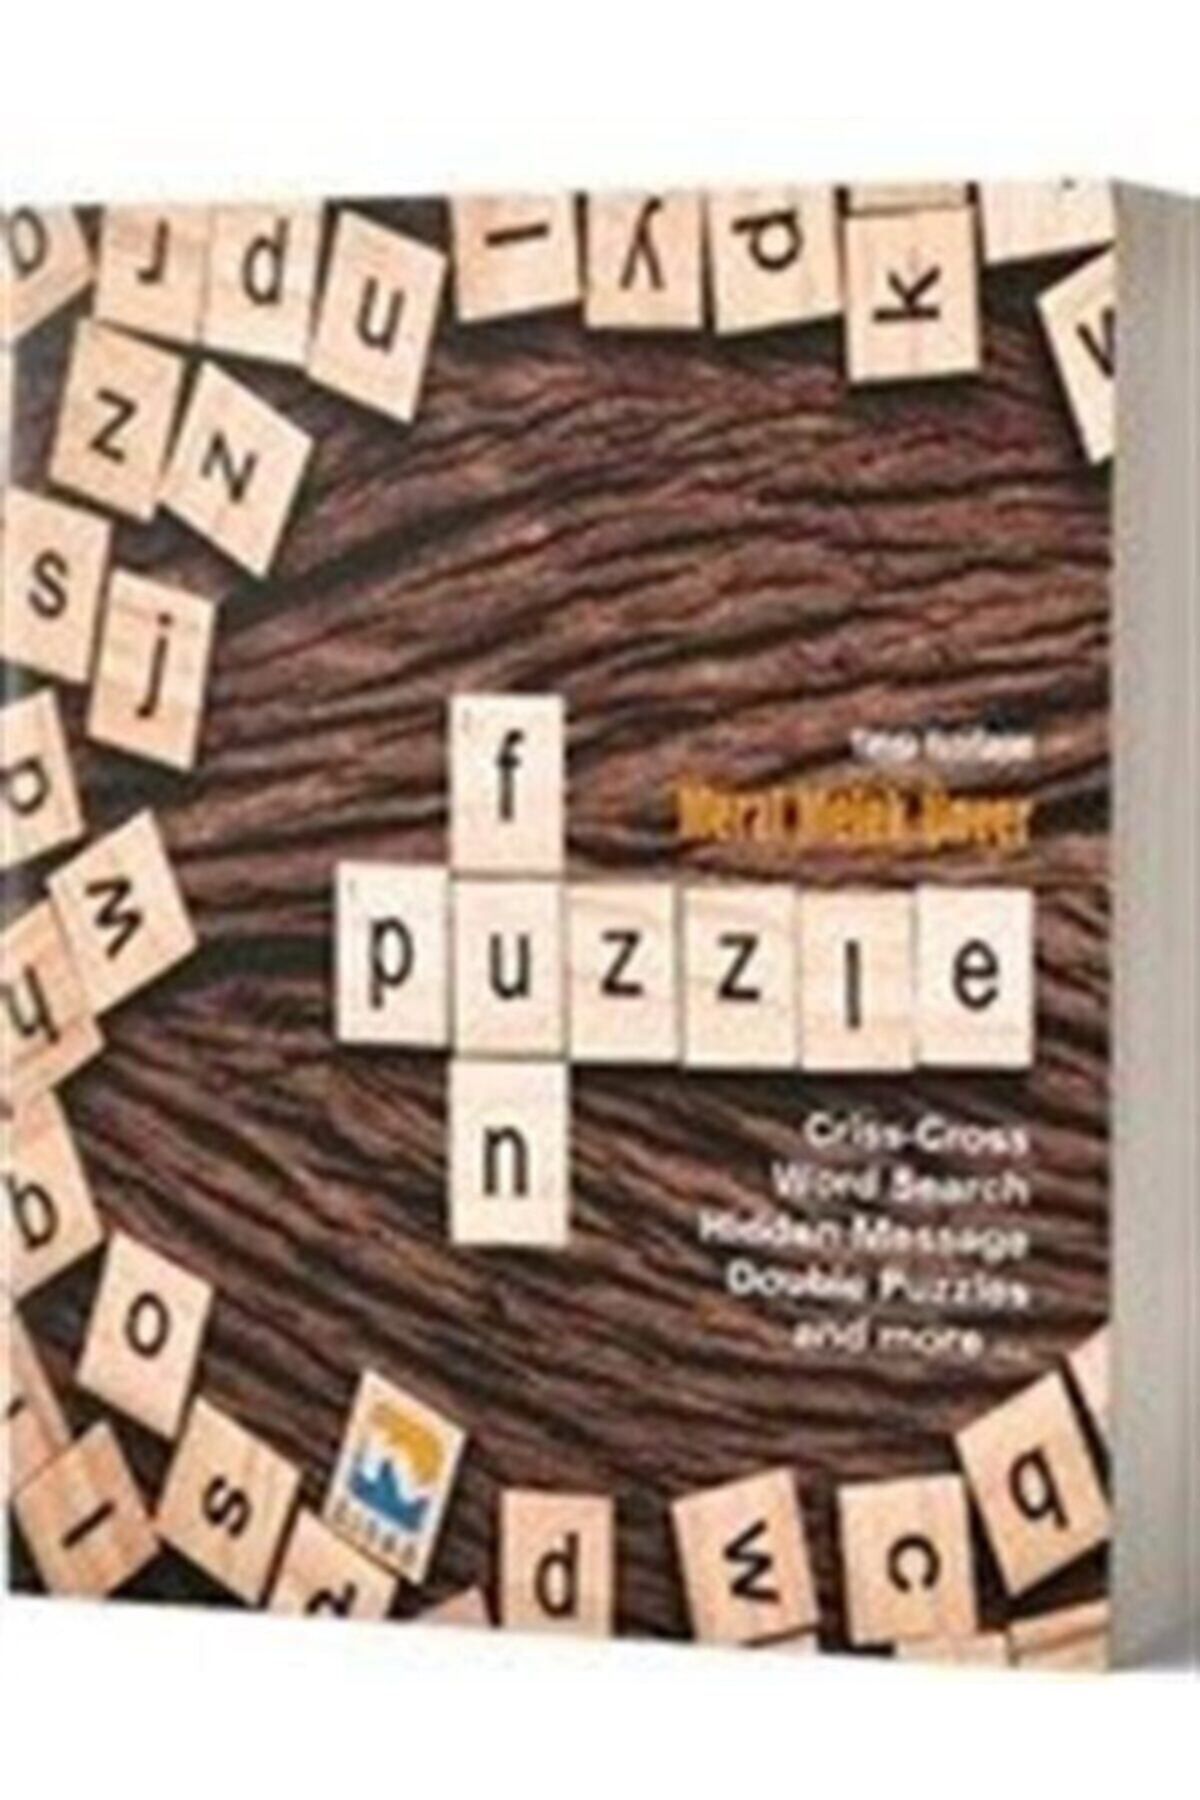 Nisan Kitabevi Puzzle Fun Criss-cross, Word Search, Hidden Message, Double Puzzles And More..